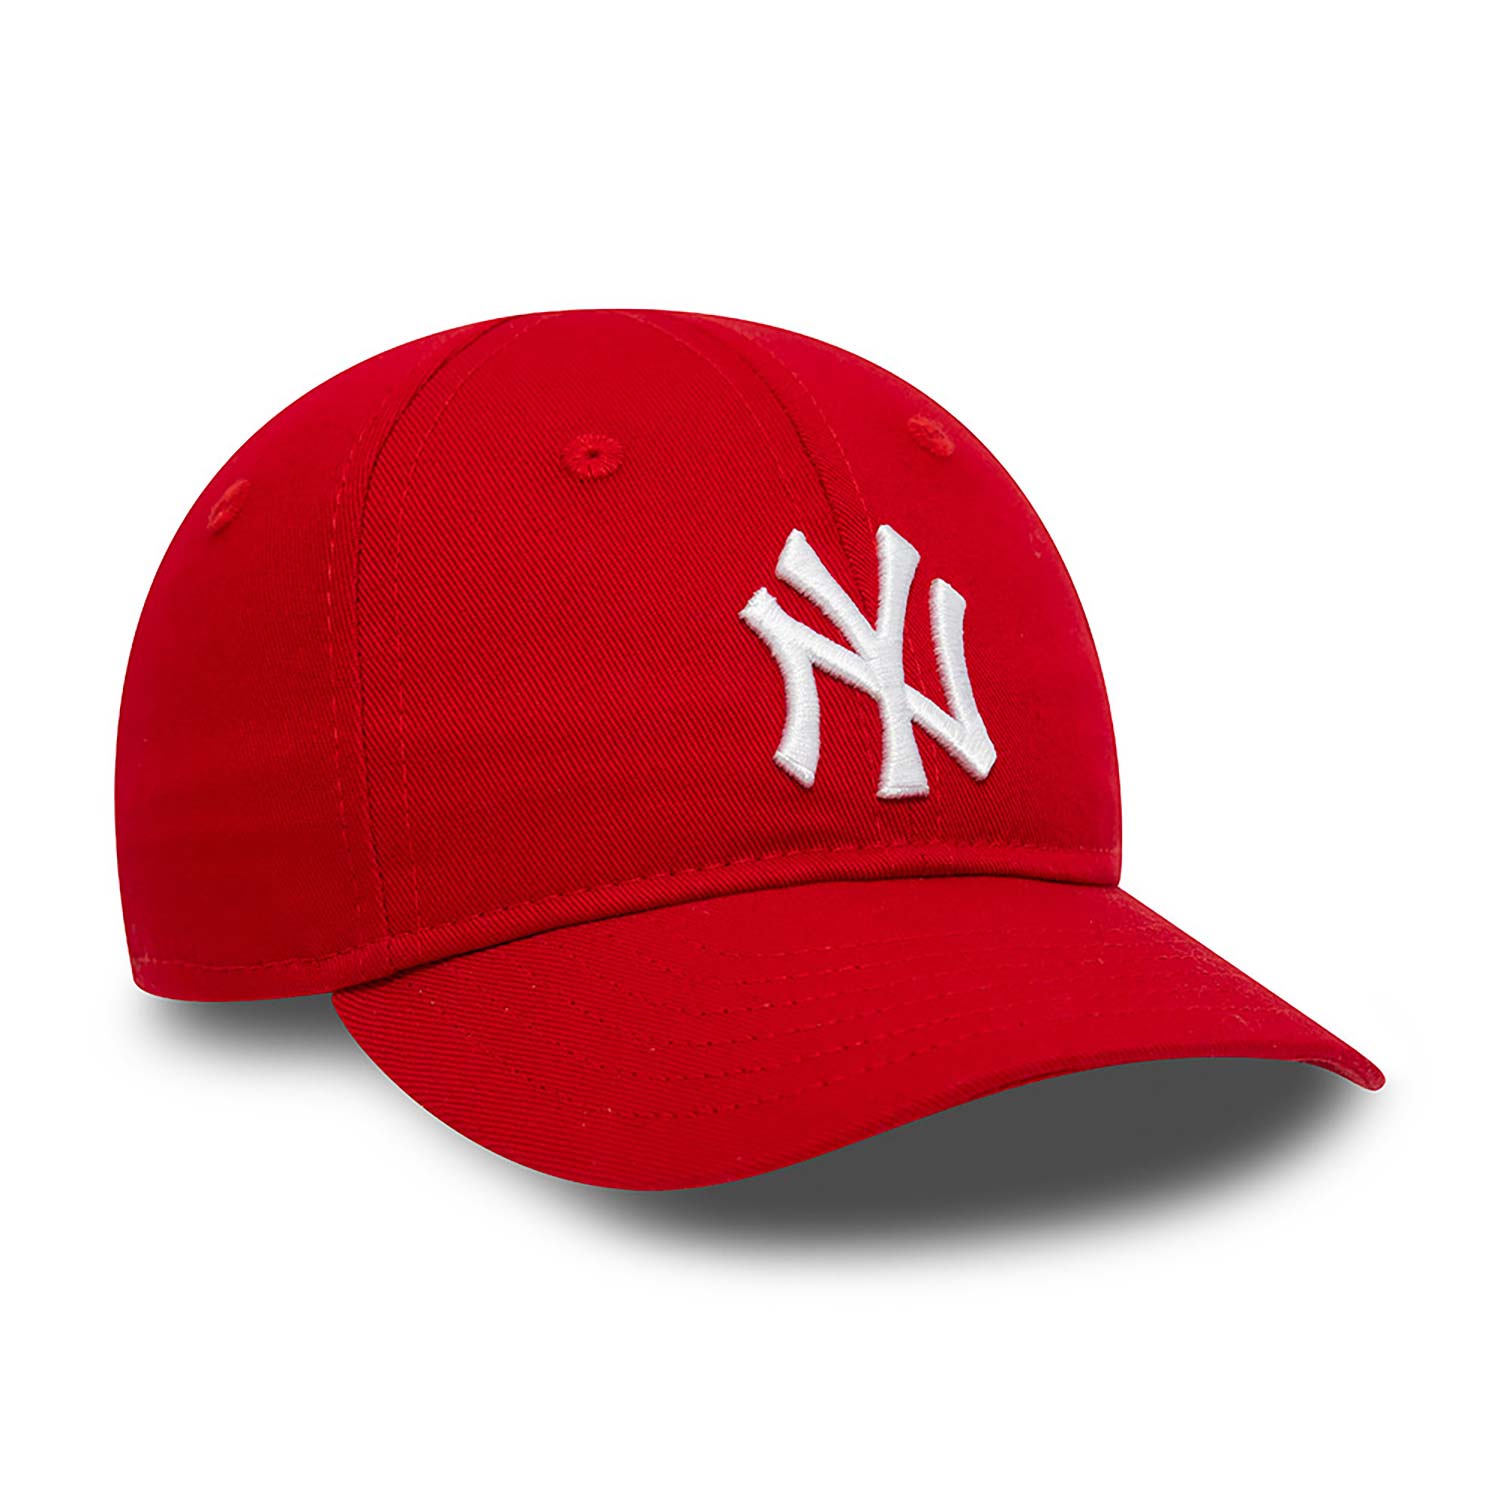 New York Yankees Infant League Essential Red 9FORTY Cap